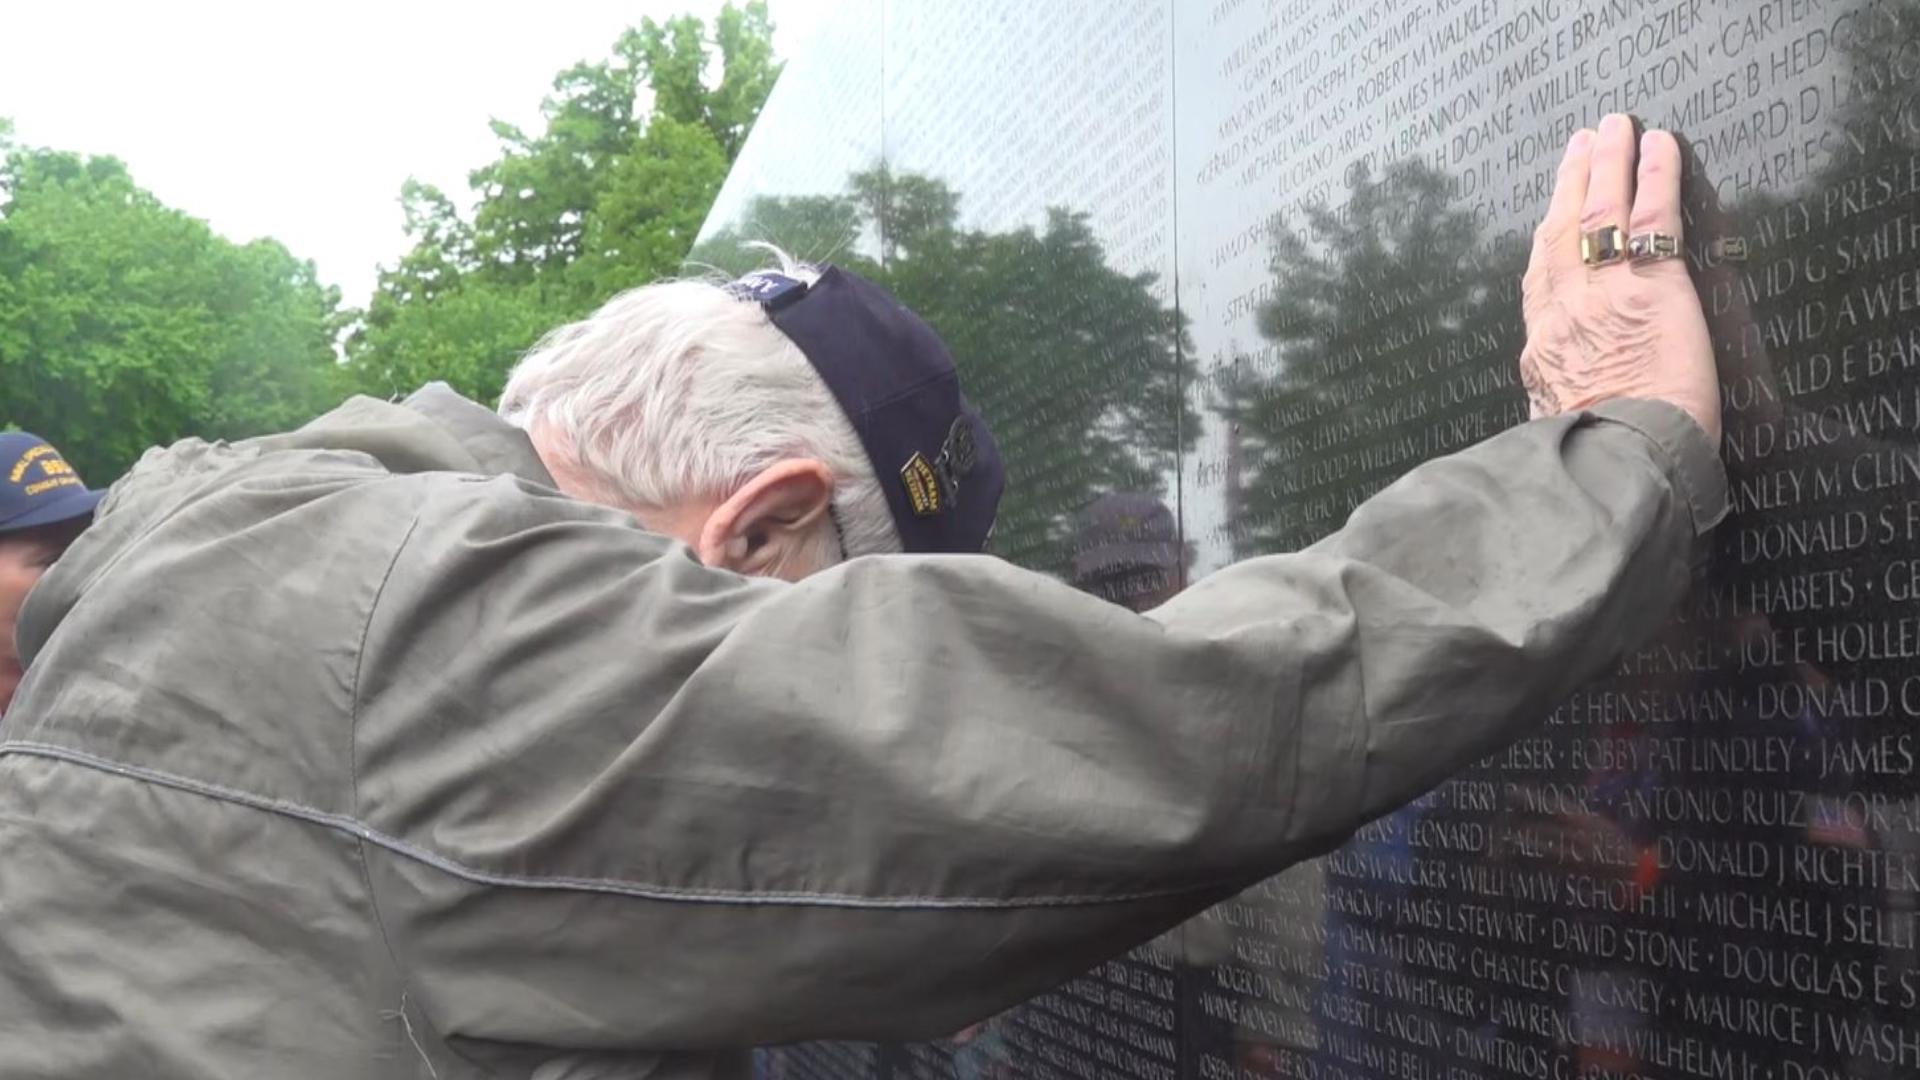 CBS 8 embedded on a flight filled with U.S. Navy SEAL Vietnam War era veterans and U.S. Naval Special Warfare Operators who are visiting their memorials in D.C.